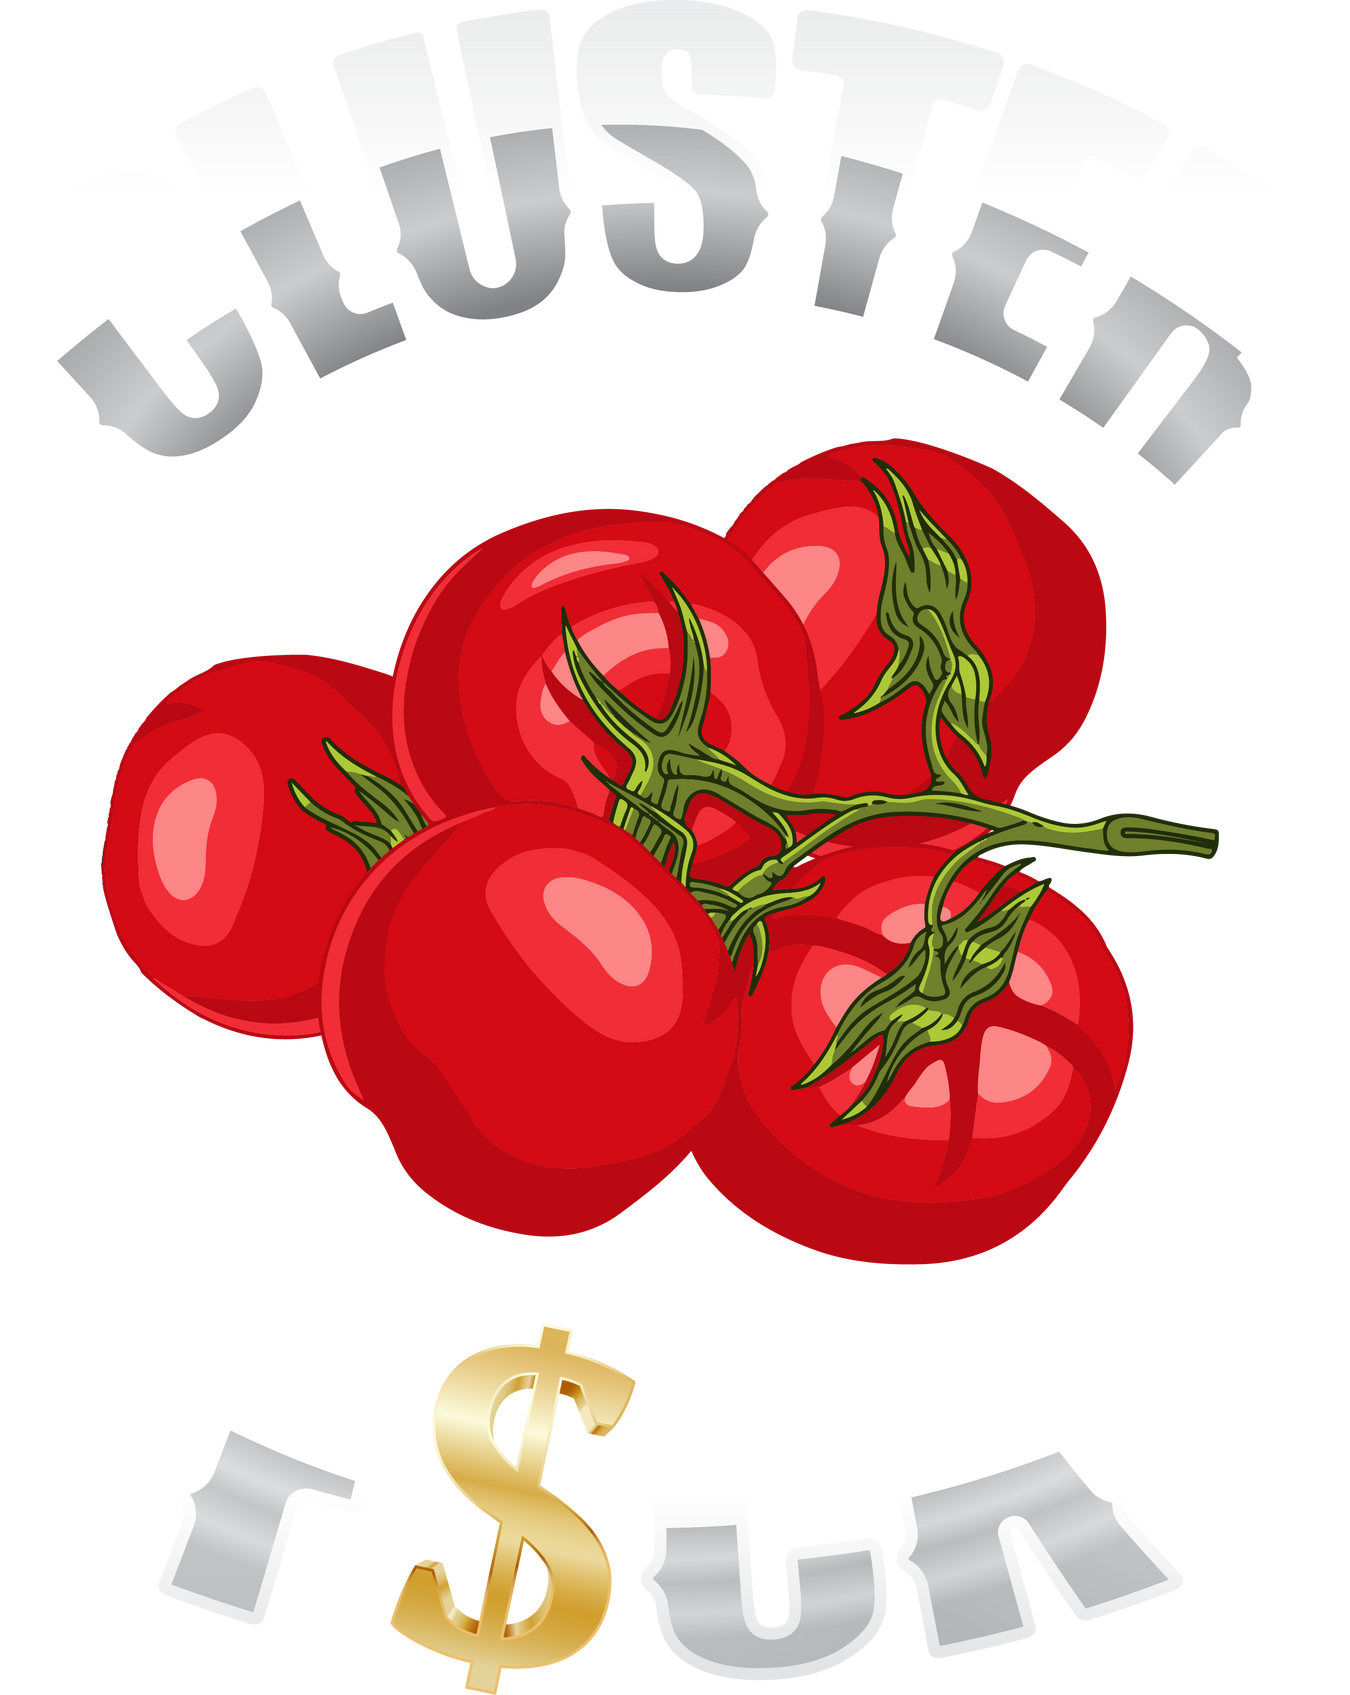 Collection-Cluster F$ck